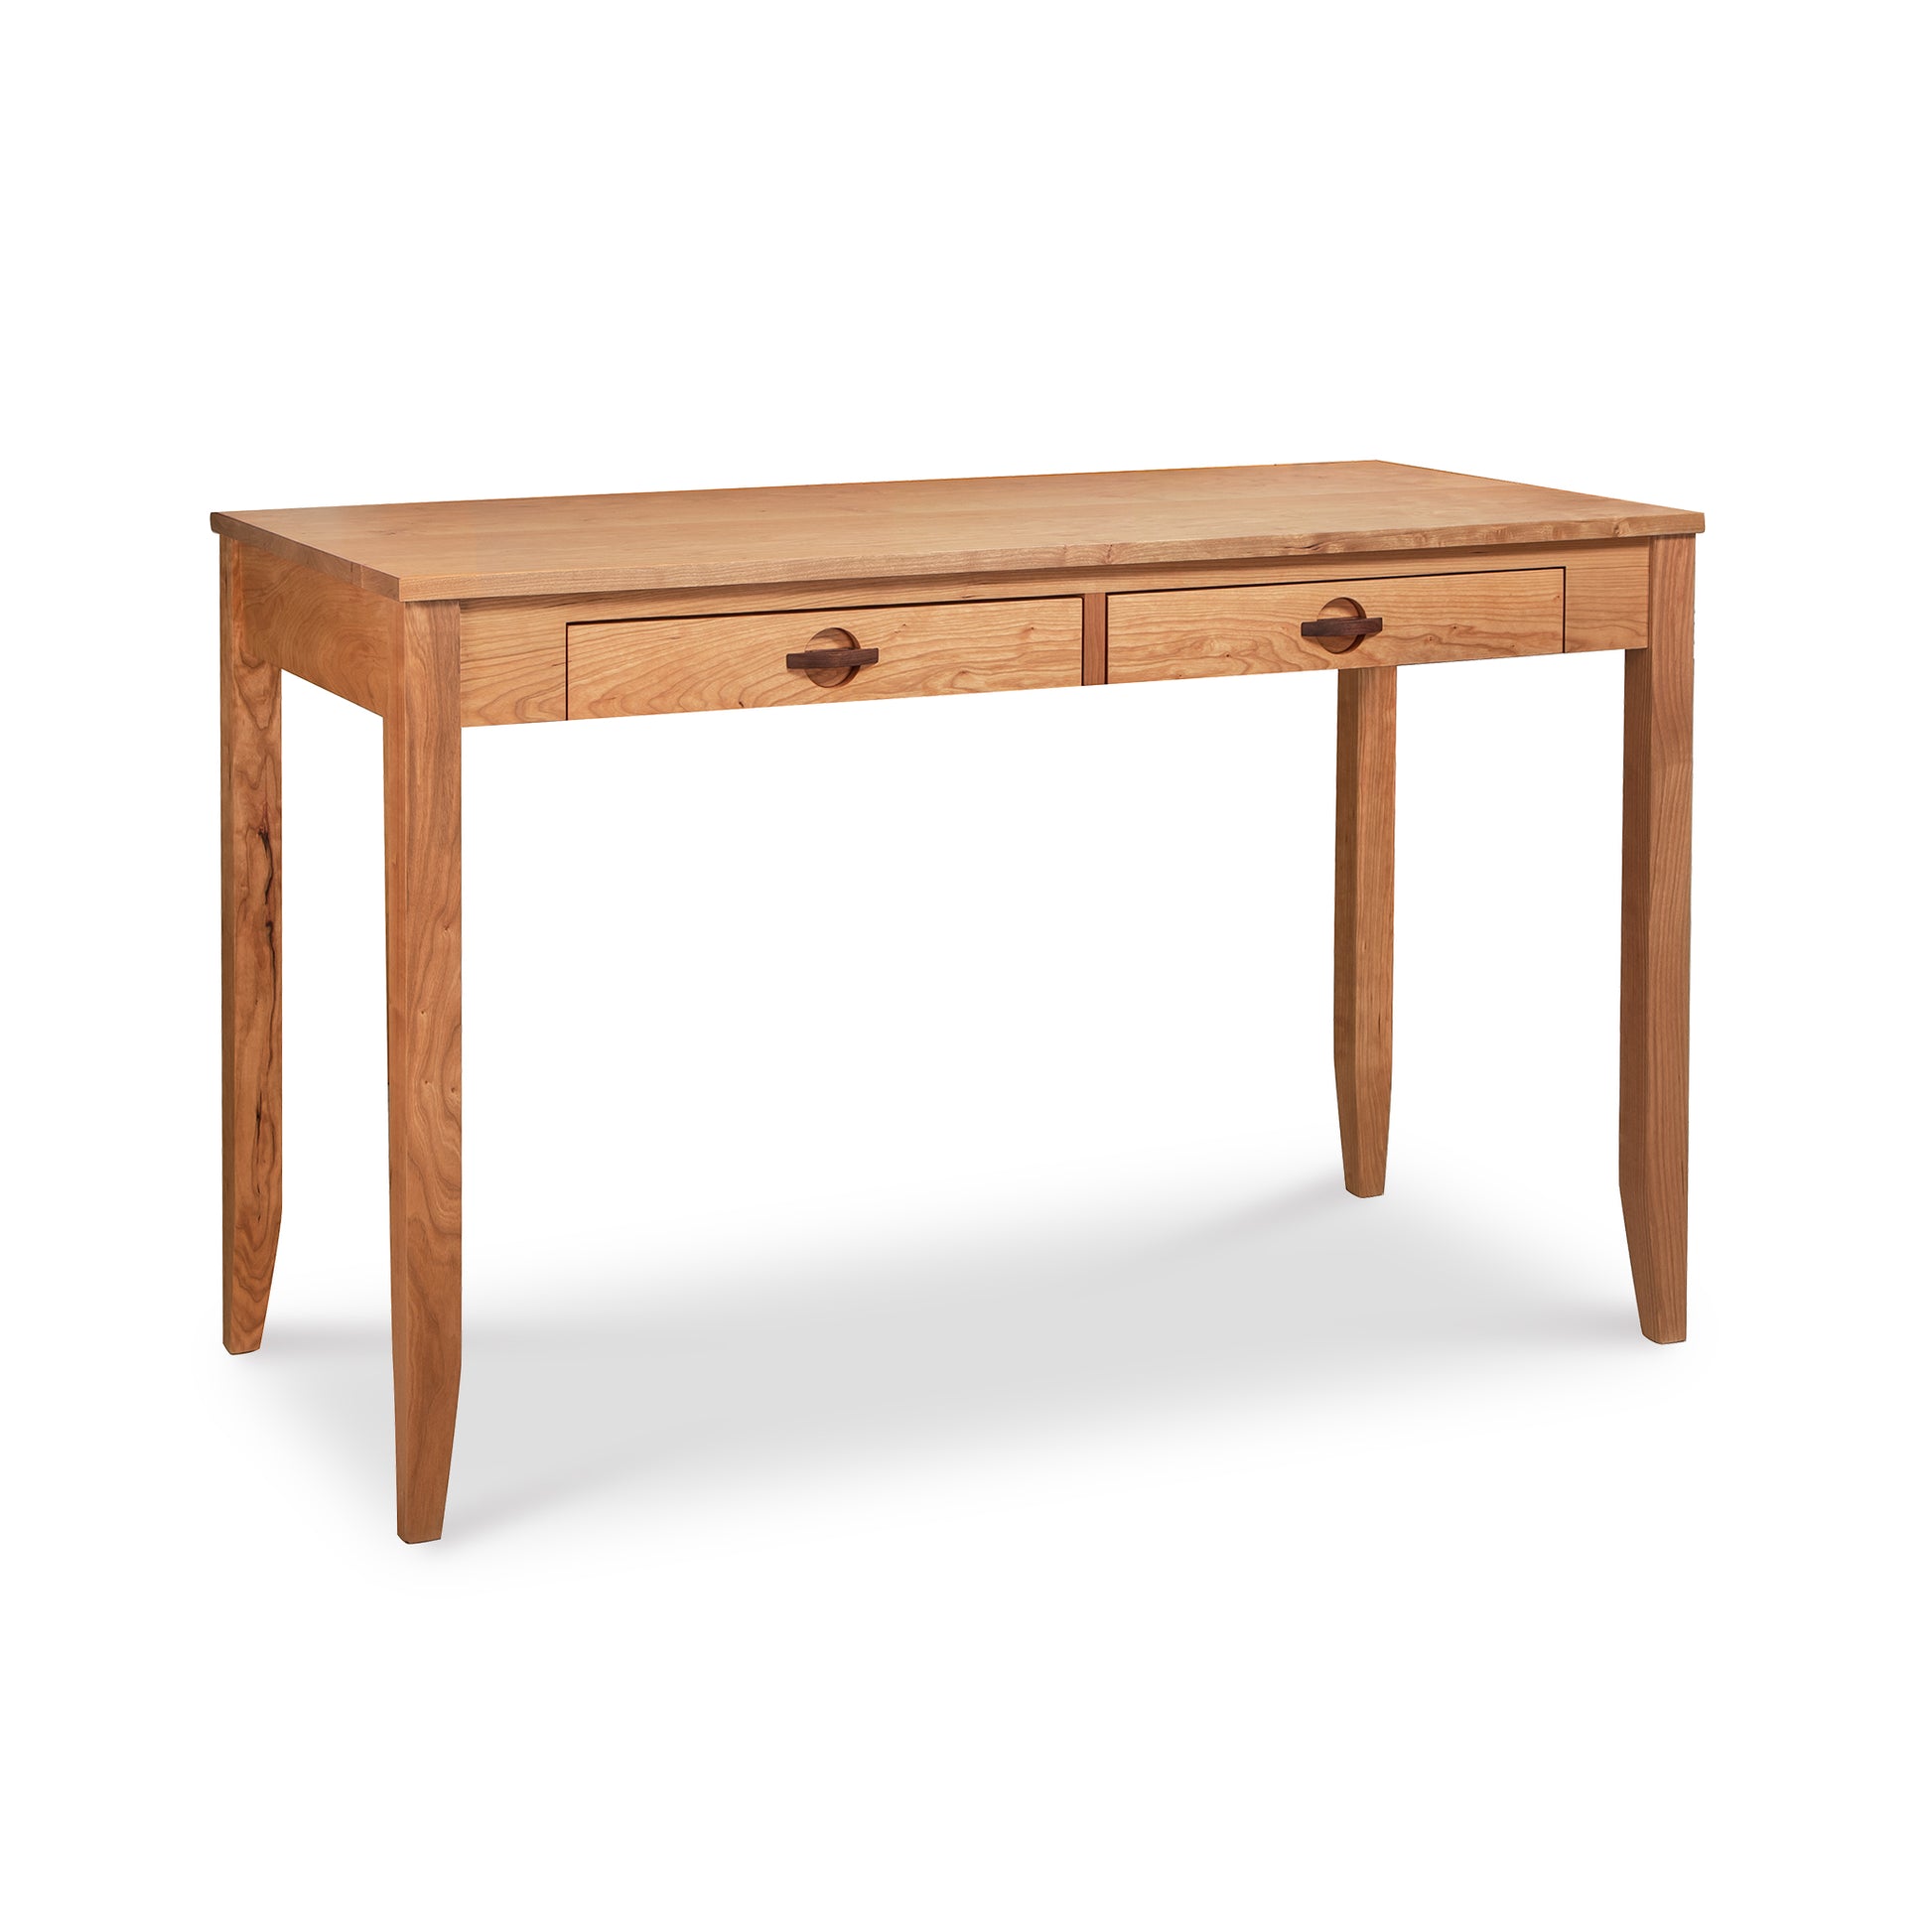 Maple Corner Woodworks Ryegate Writing Desk made of solid wood construction with two drawers on a white background.